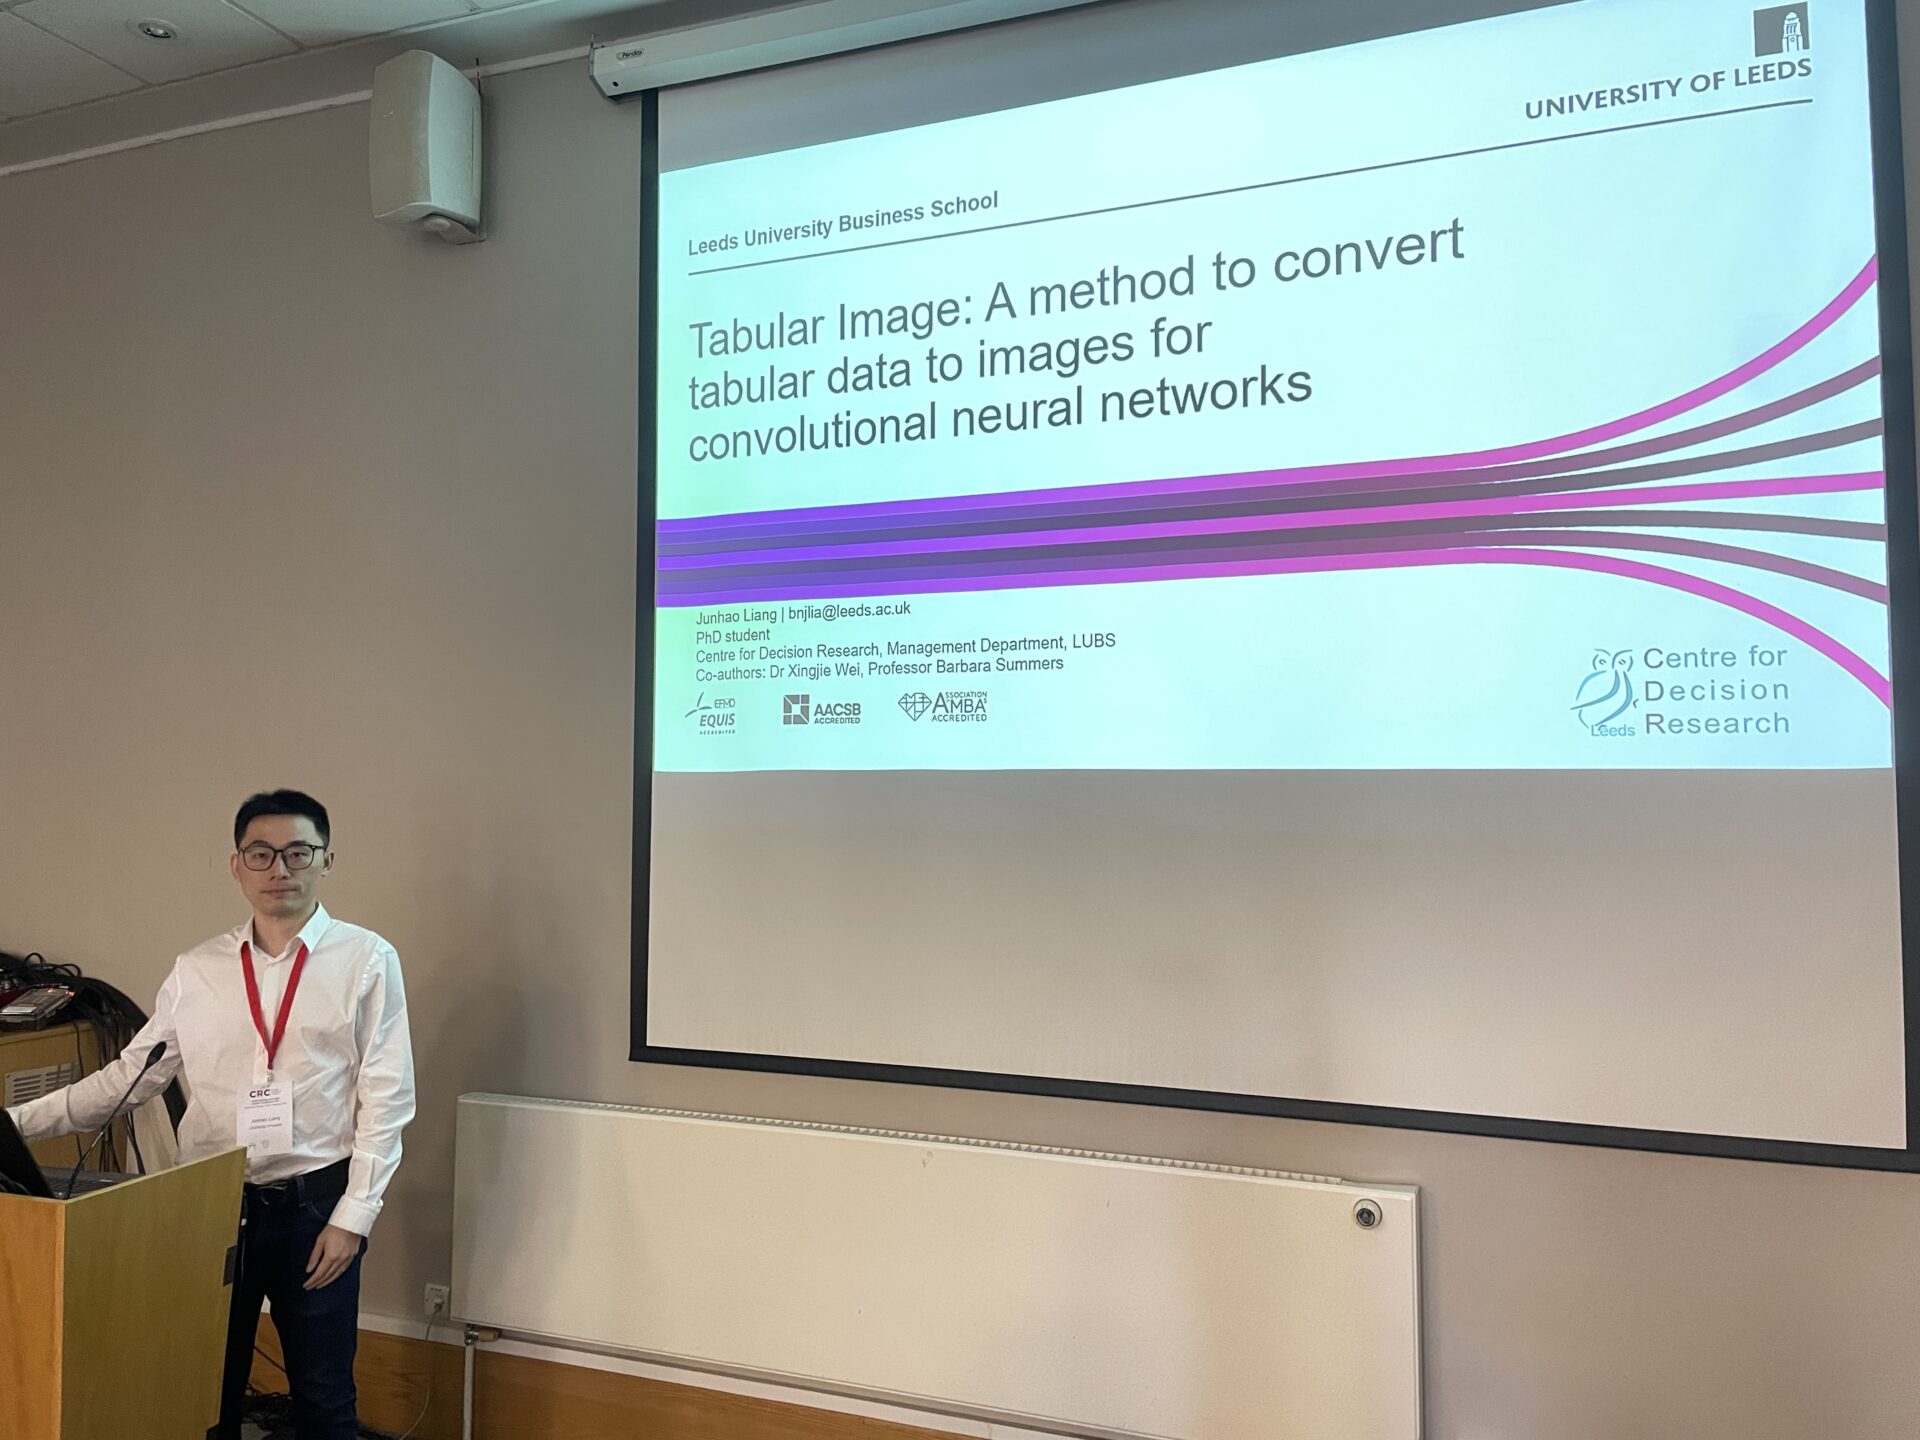 Junhao Liang - Tabular Image: A Method to Convert Tabular Data to Images for Convolutional Neural Networks